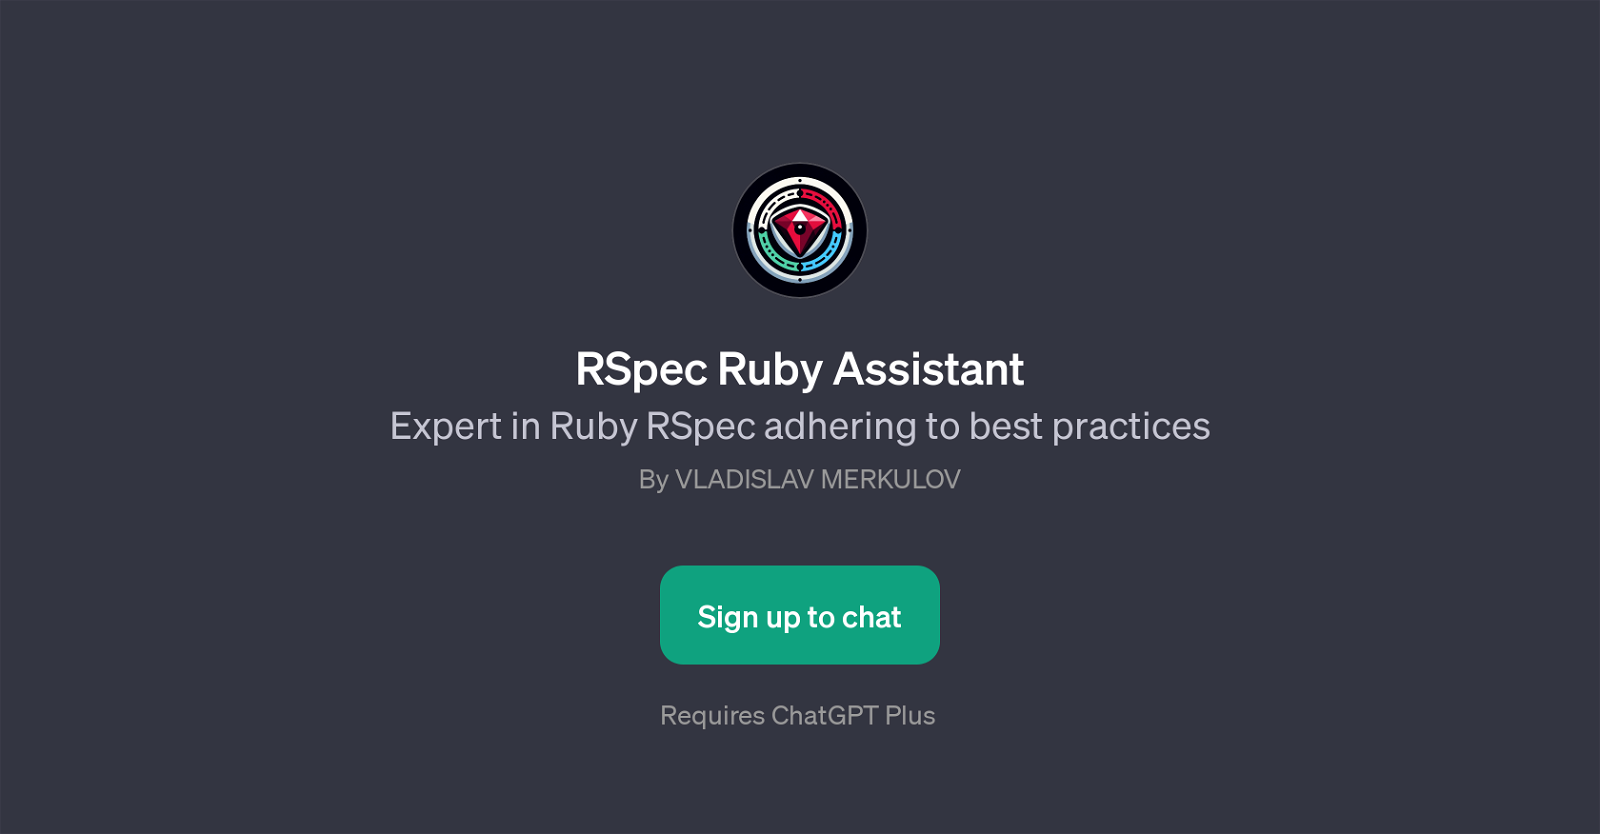 RSpec Ruby Assistant website